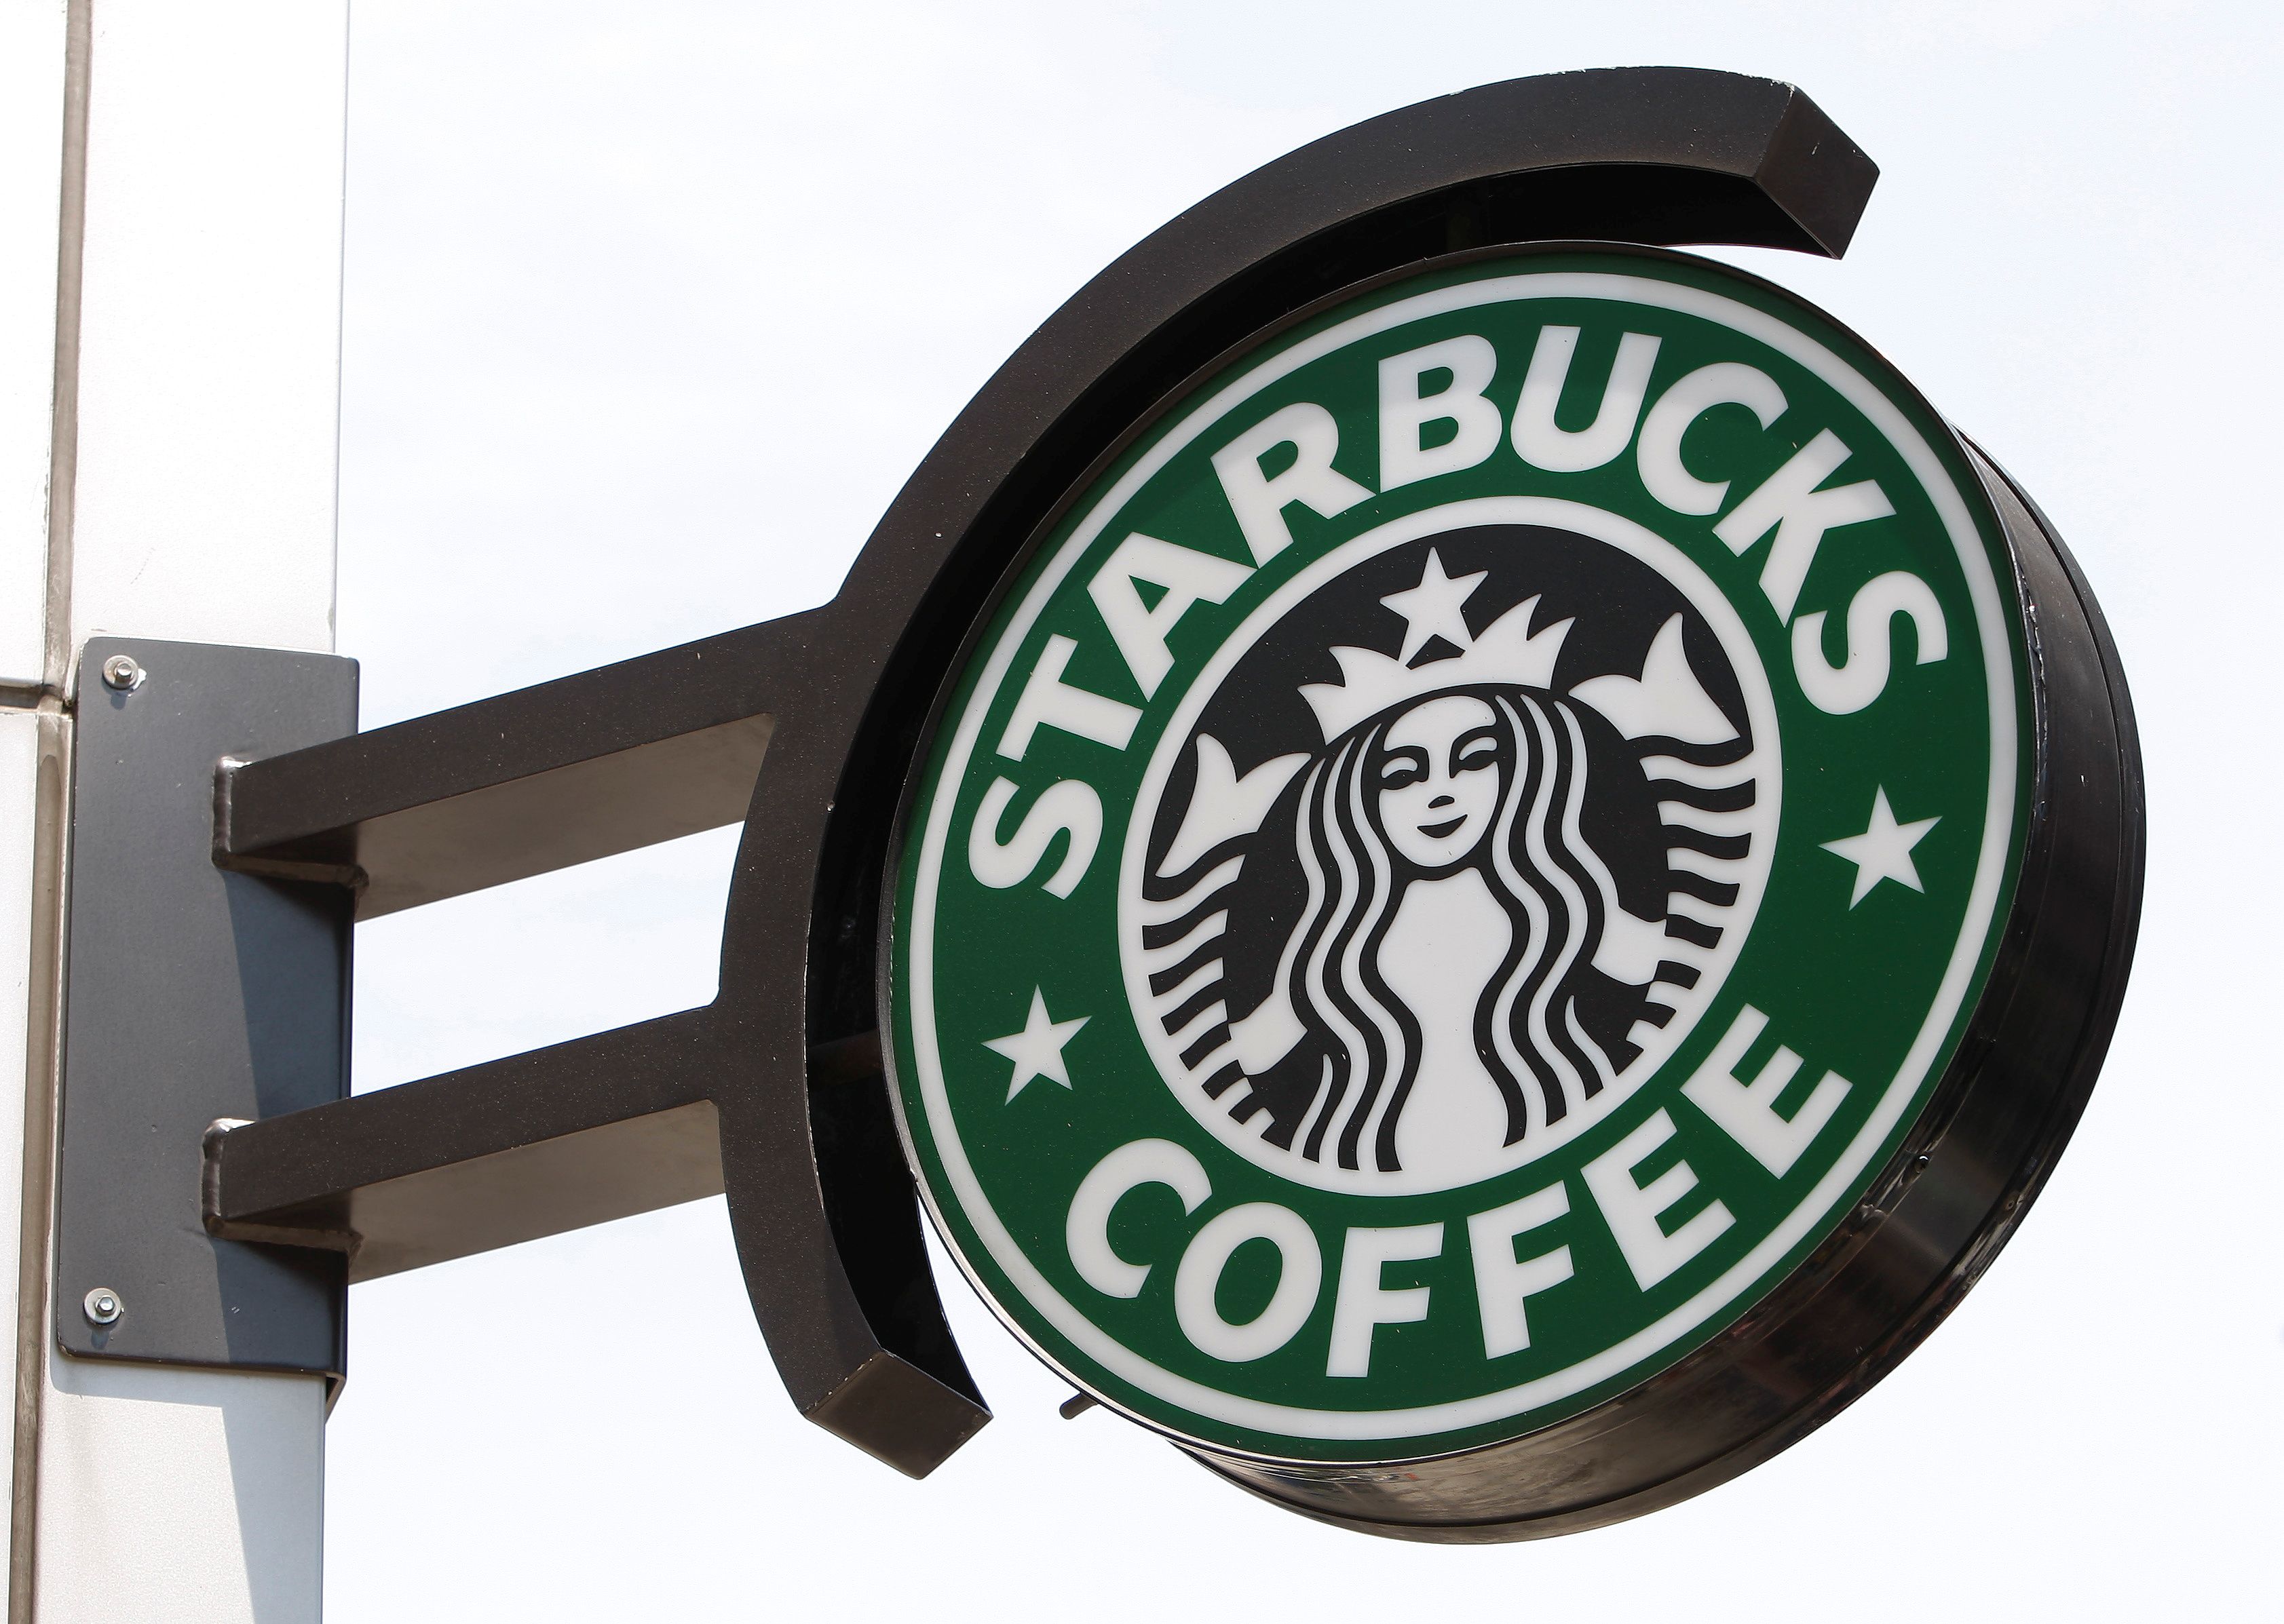 University of Kentucky's Starbucks at William T. Young Library Goes Bankrupt